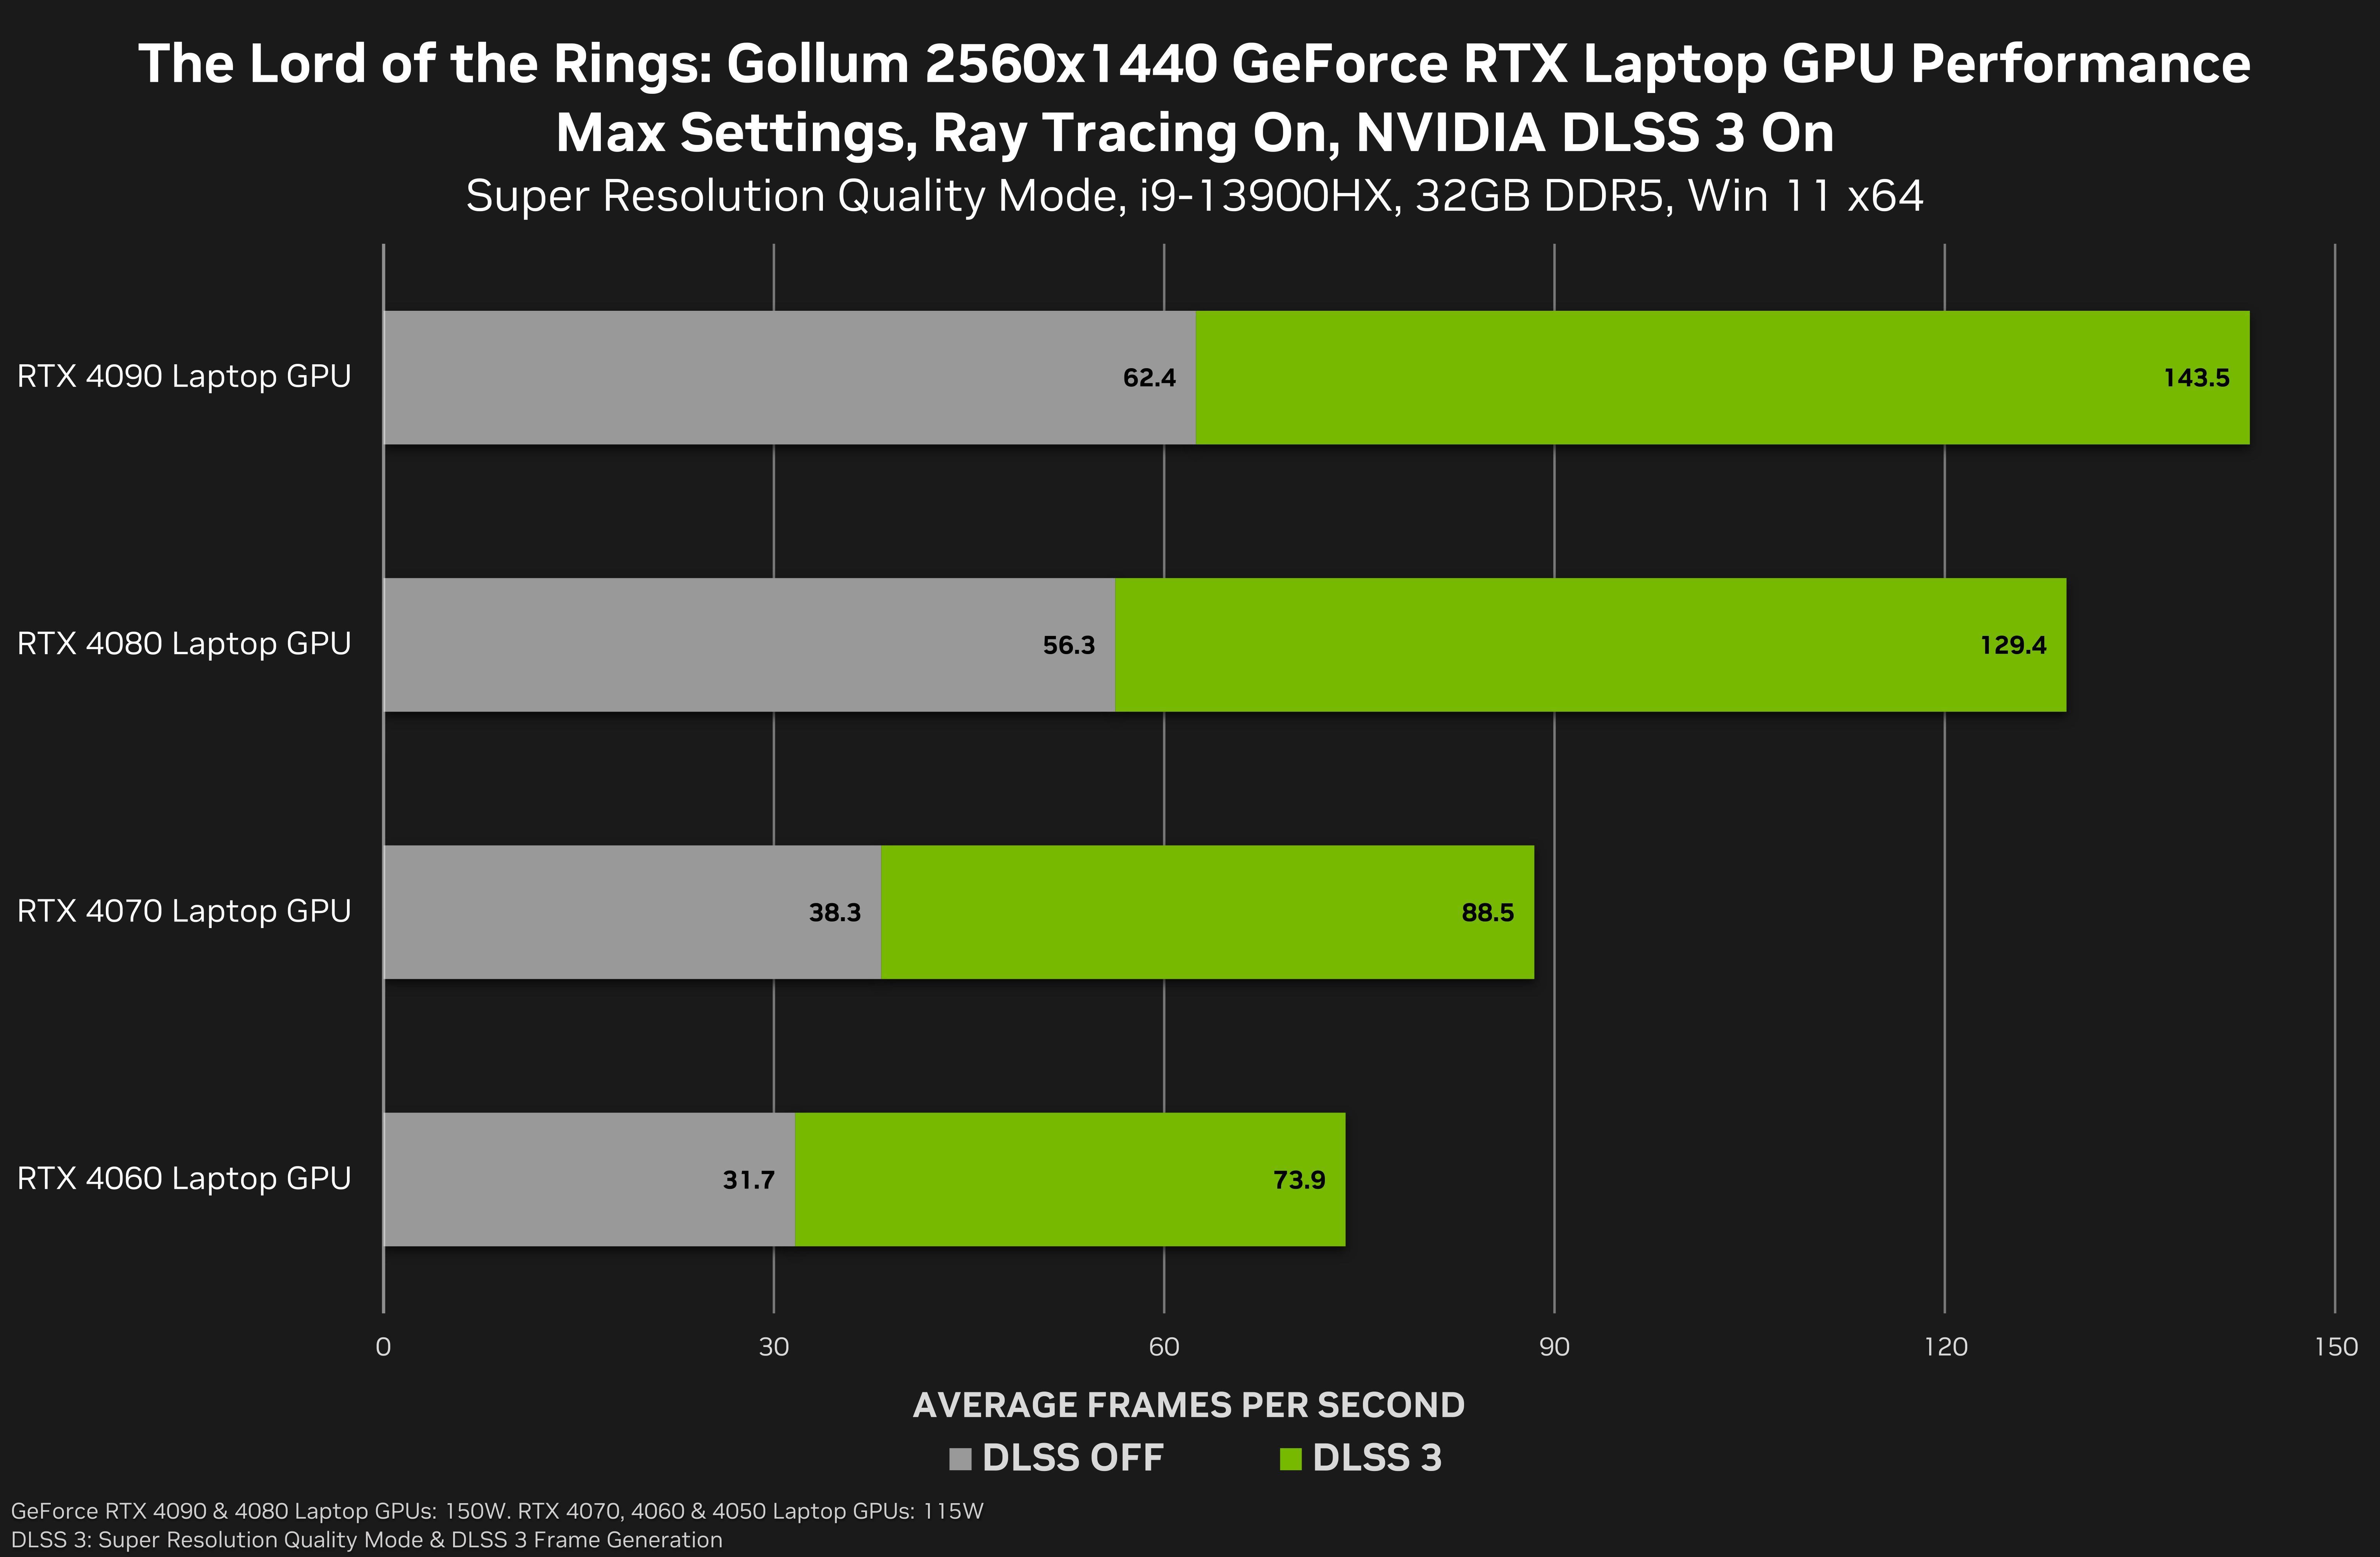 GeForce RTX 4060 Ti: Professional Content Creation and AI Performance -  Nvidia GeForce RTX 4060 Ti Review: 1080p Gaming for $399 - Page 8